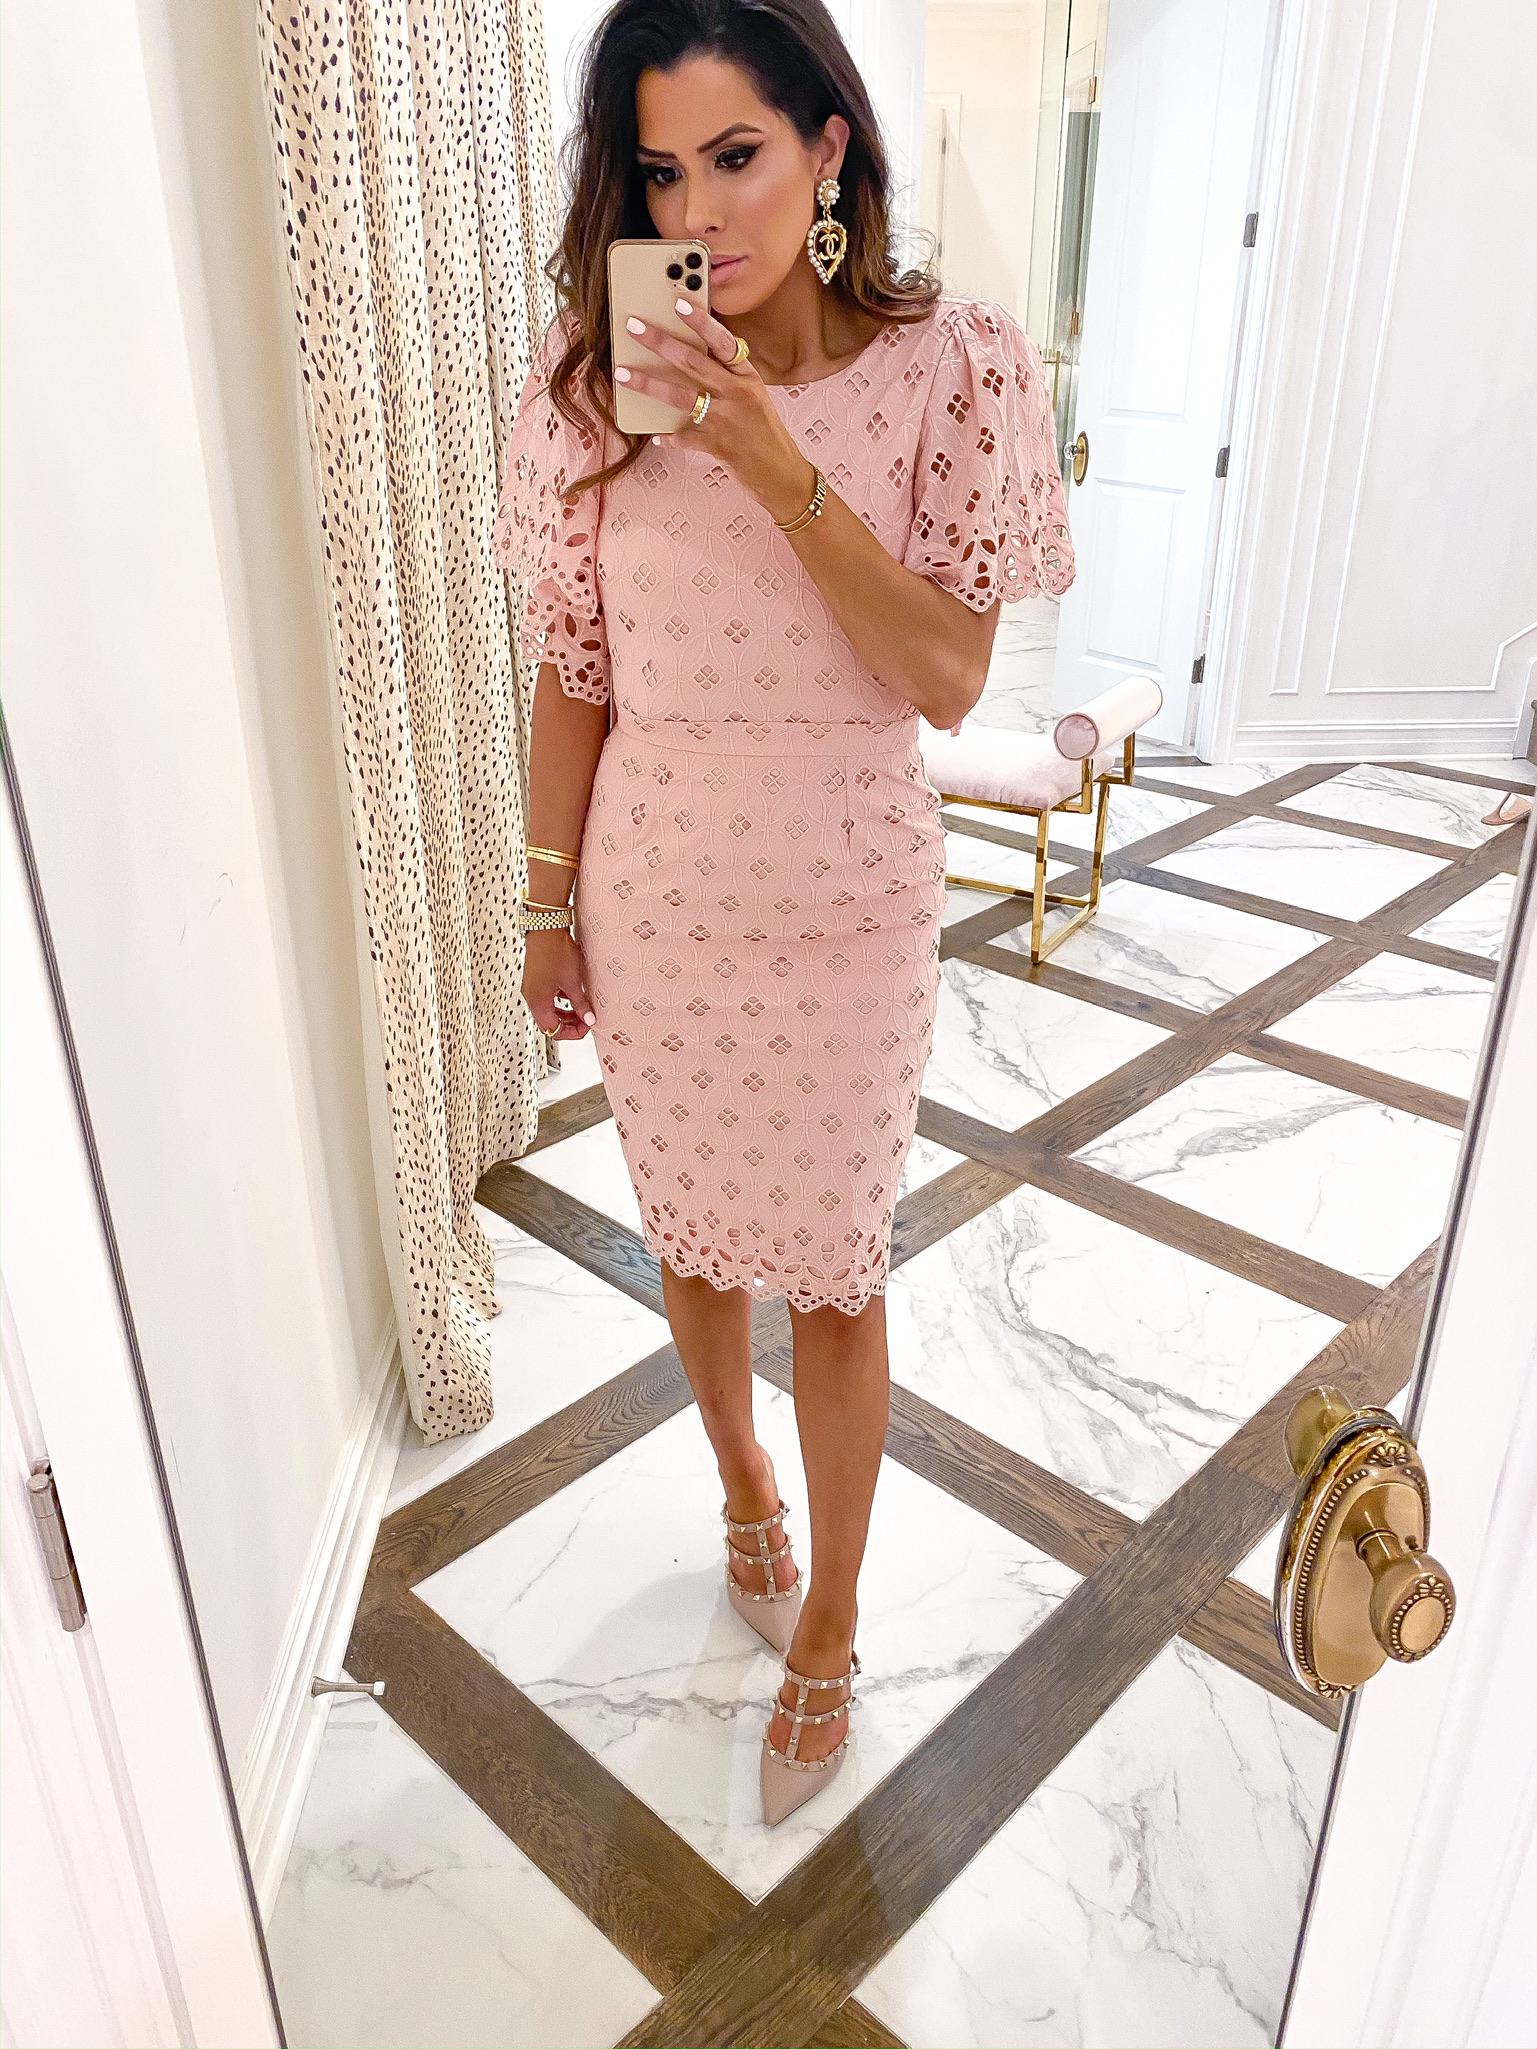 Instagram Fashion by popular US fashion blog, The Sweetest Thing: image of a woman wearing a Nordstrom Eyelet Sheath Dress RACHEL PARCELL, Nordstrom Rockstud T-Strap Pump VALENTINO GARAVANI, Dior and Cartier stacks, Cartier rings, and Chanel earrings. 